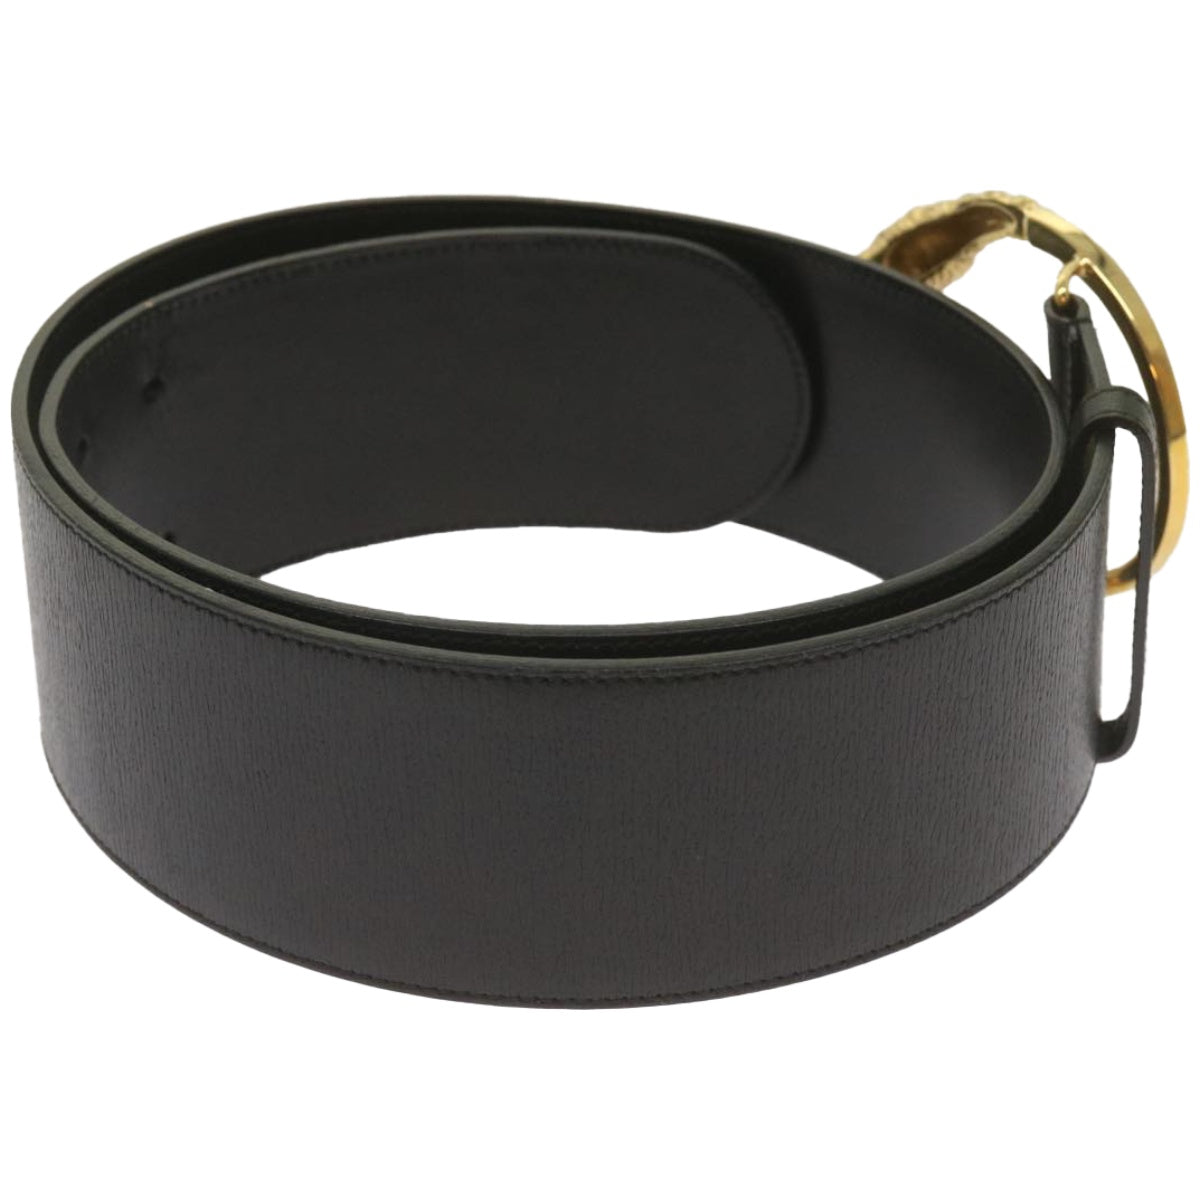 GUCCI Belt Leather 37"" Black Auth bs12276